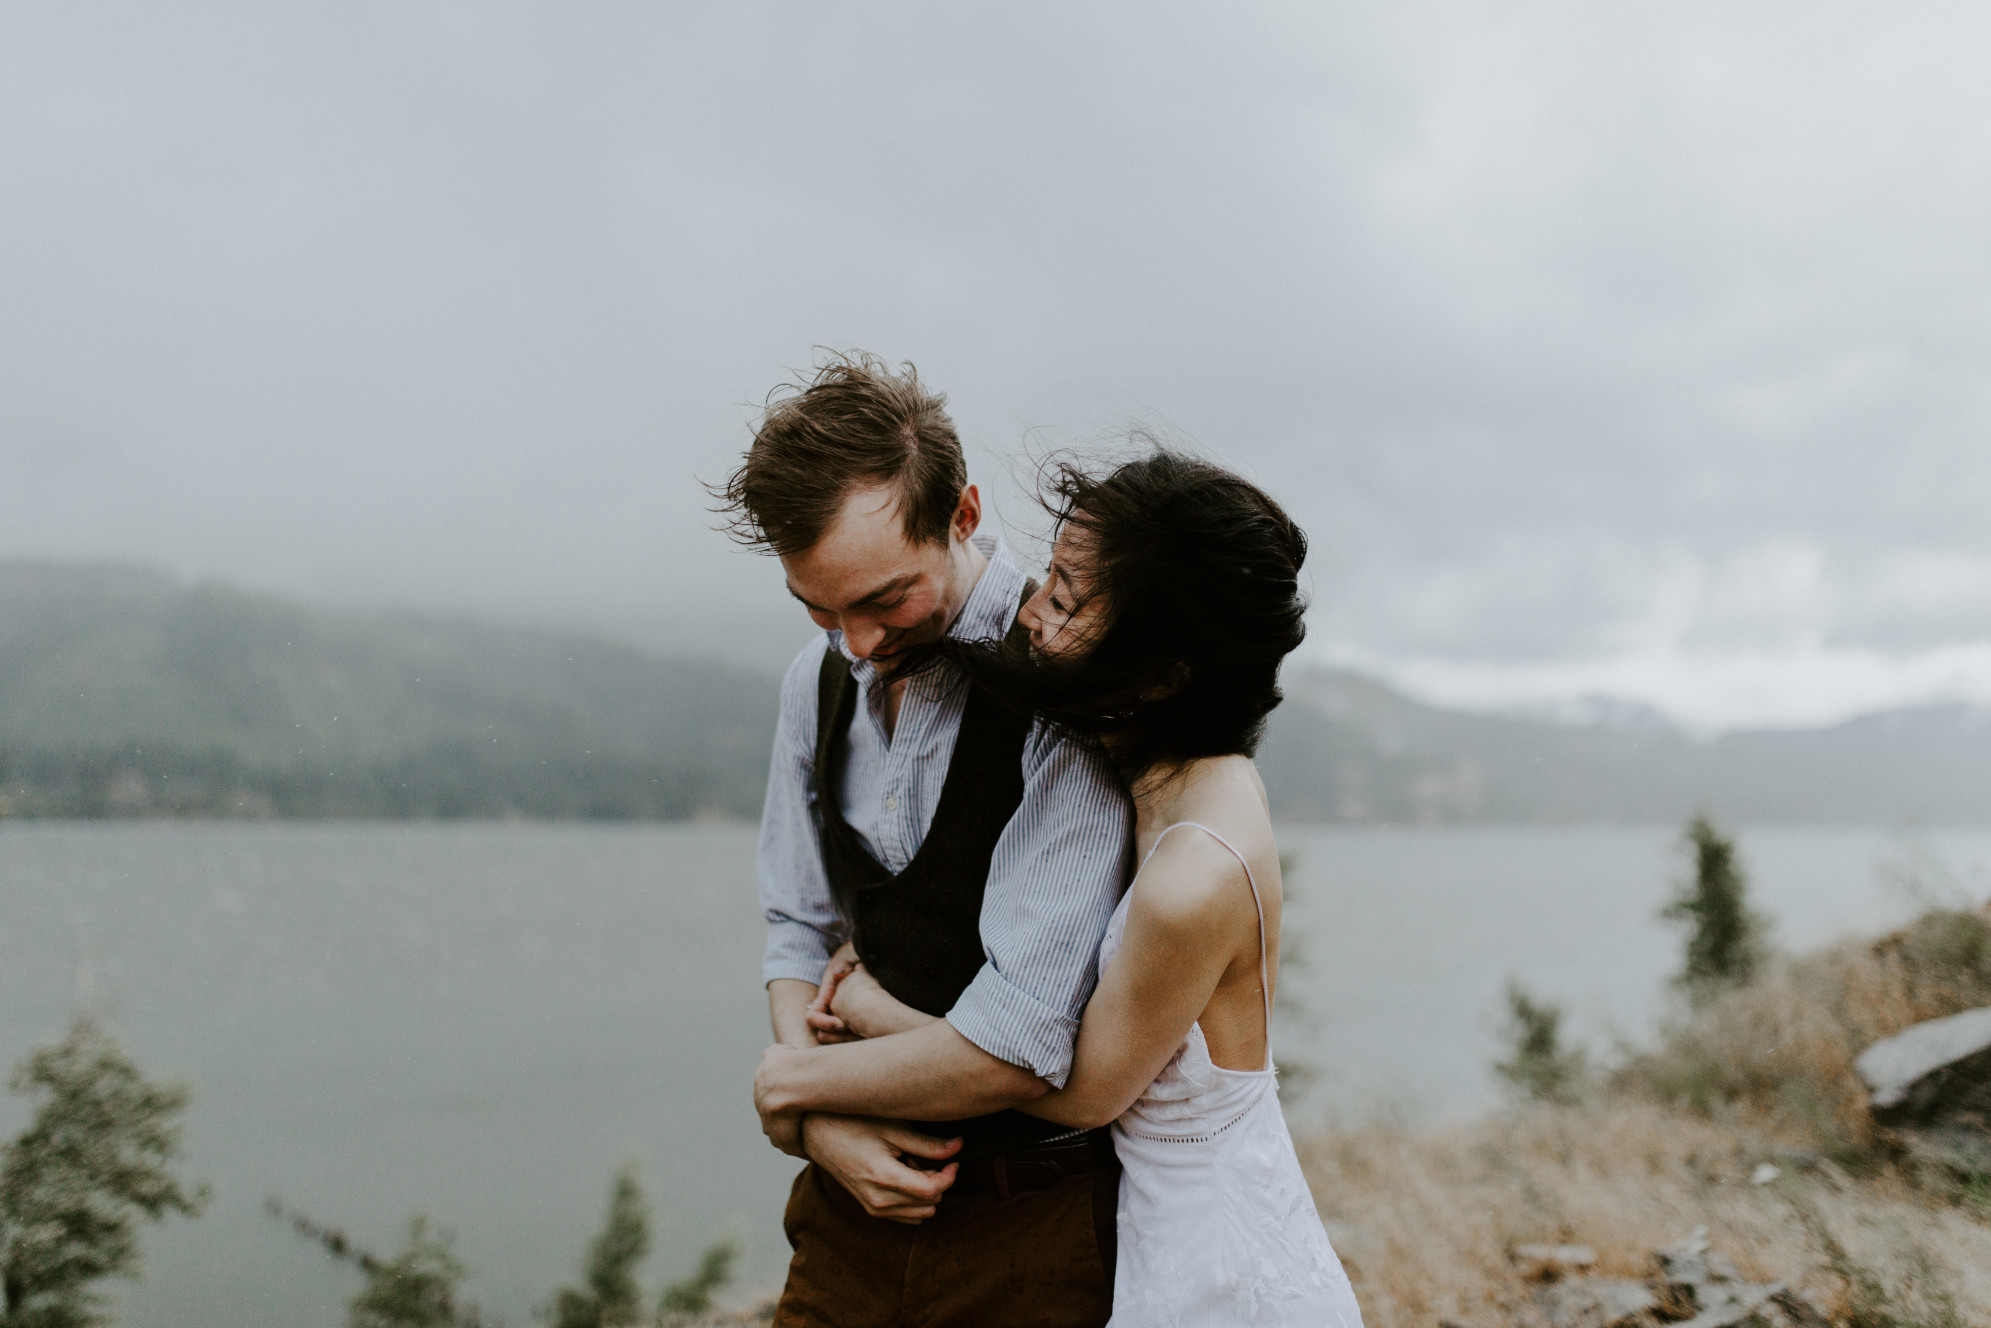 Kimberlie holds onto Jacob while smiling. Elopement wedding photography at Cascade Locks by Sienna Plus Josh.